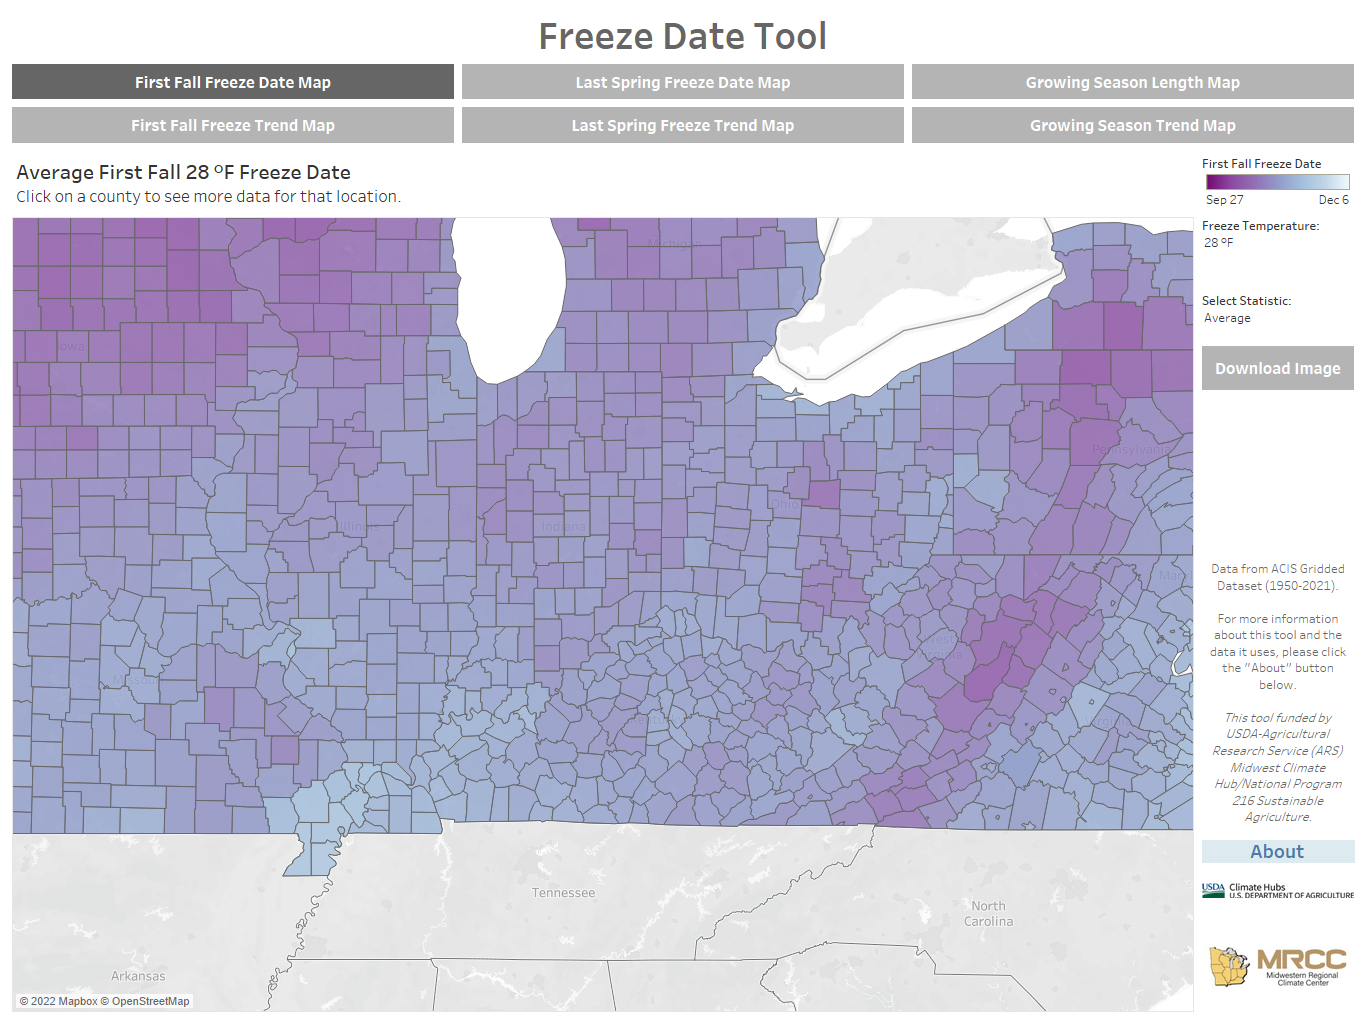 Figure 1. Example map from the MRCC’s Freeze Date Tool that shows the average date of the first fall freeze defined at the 28 degrees Fahrenheit threshold.